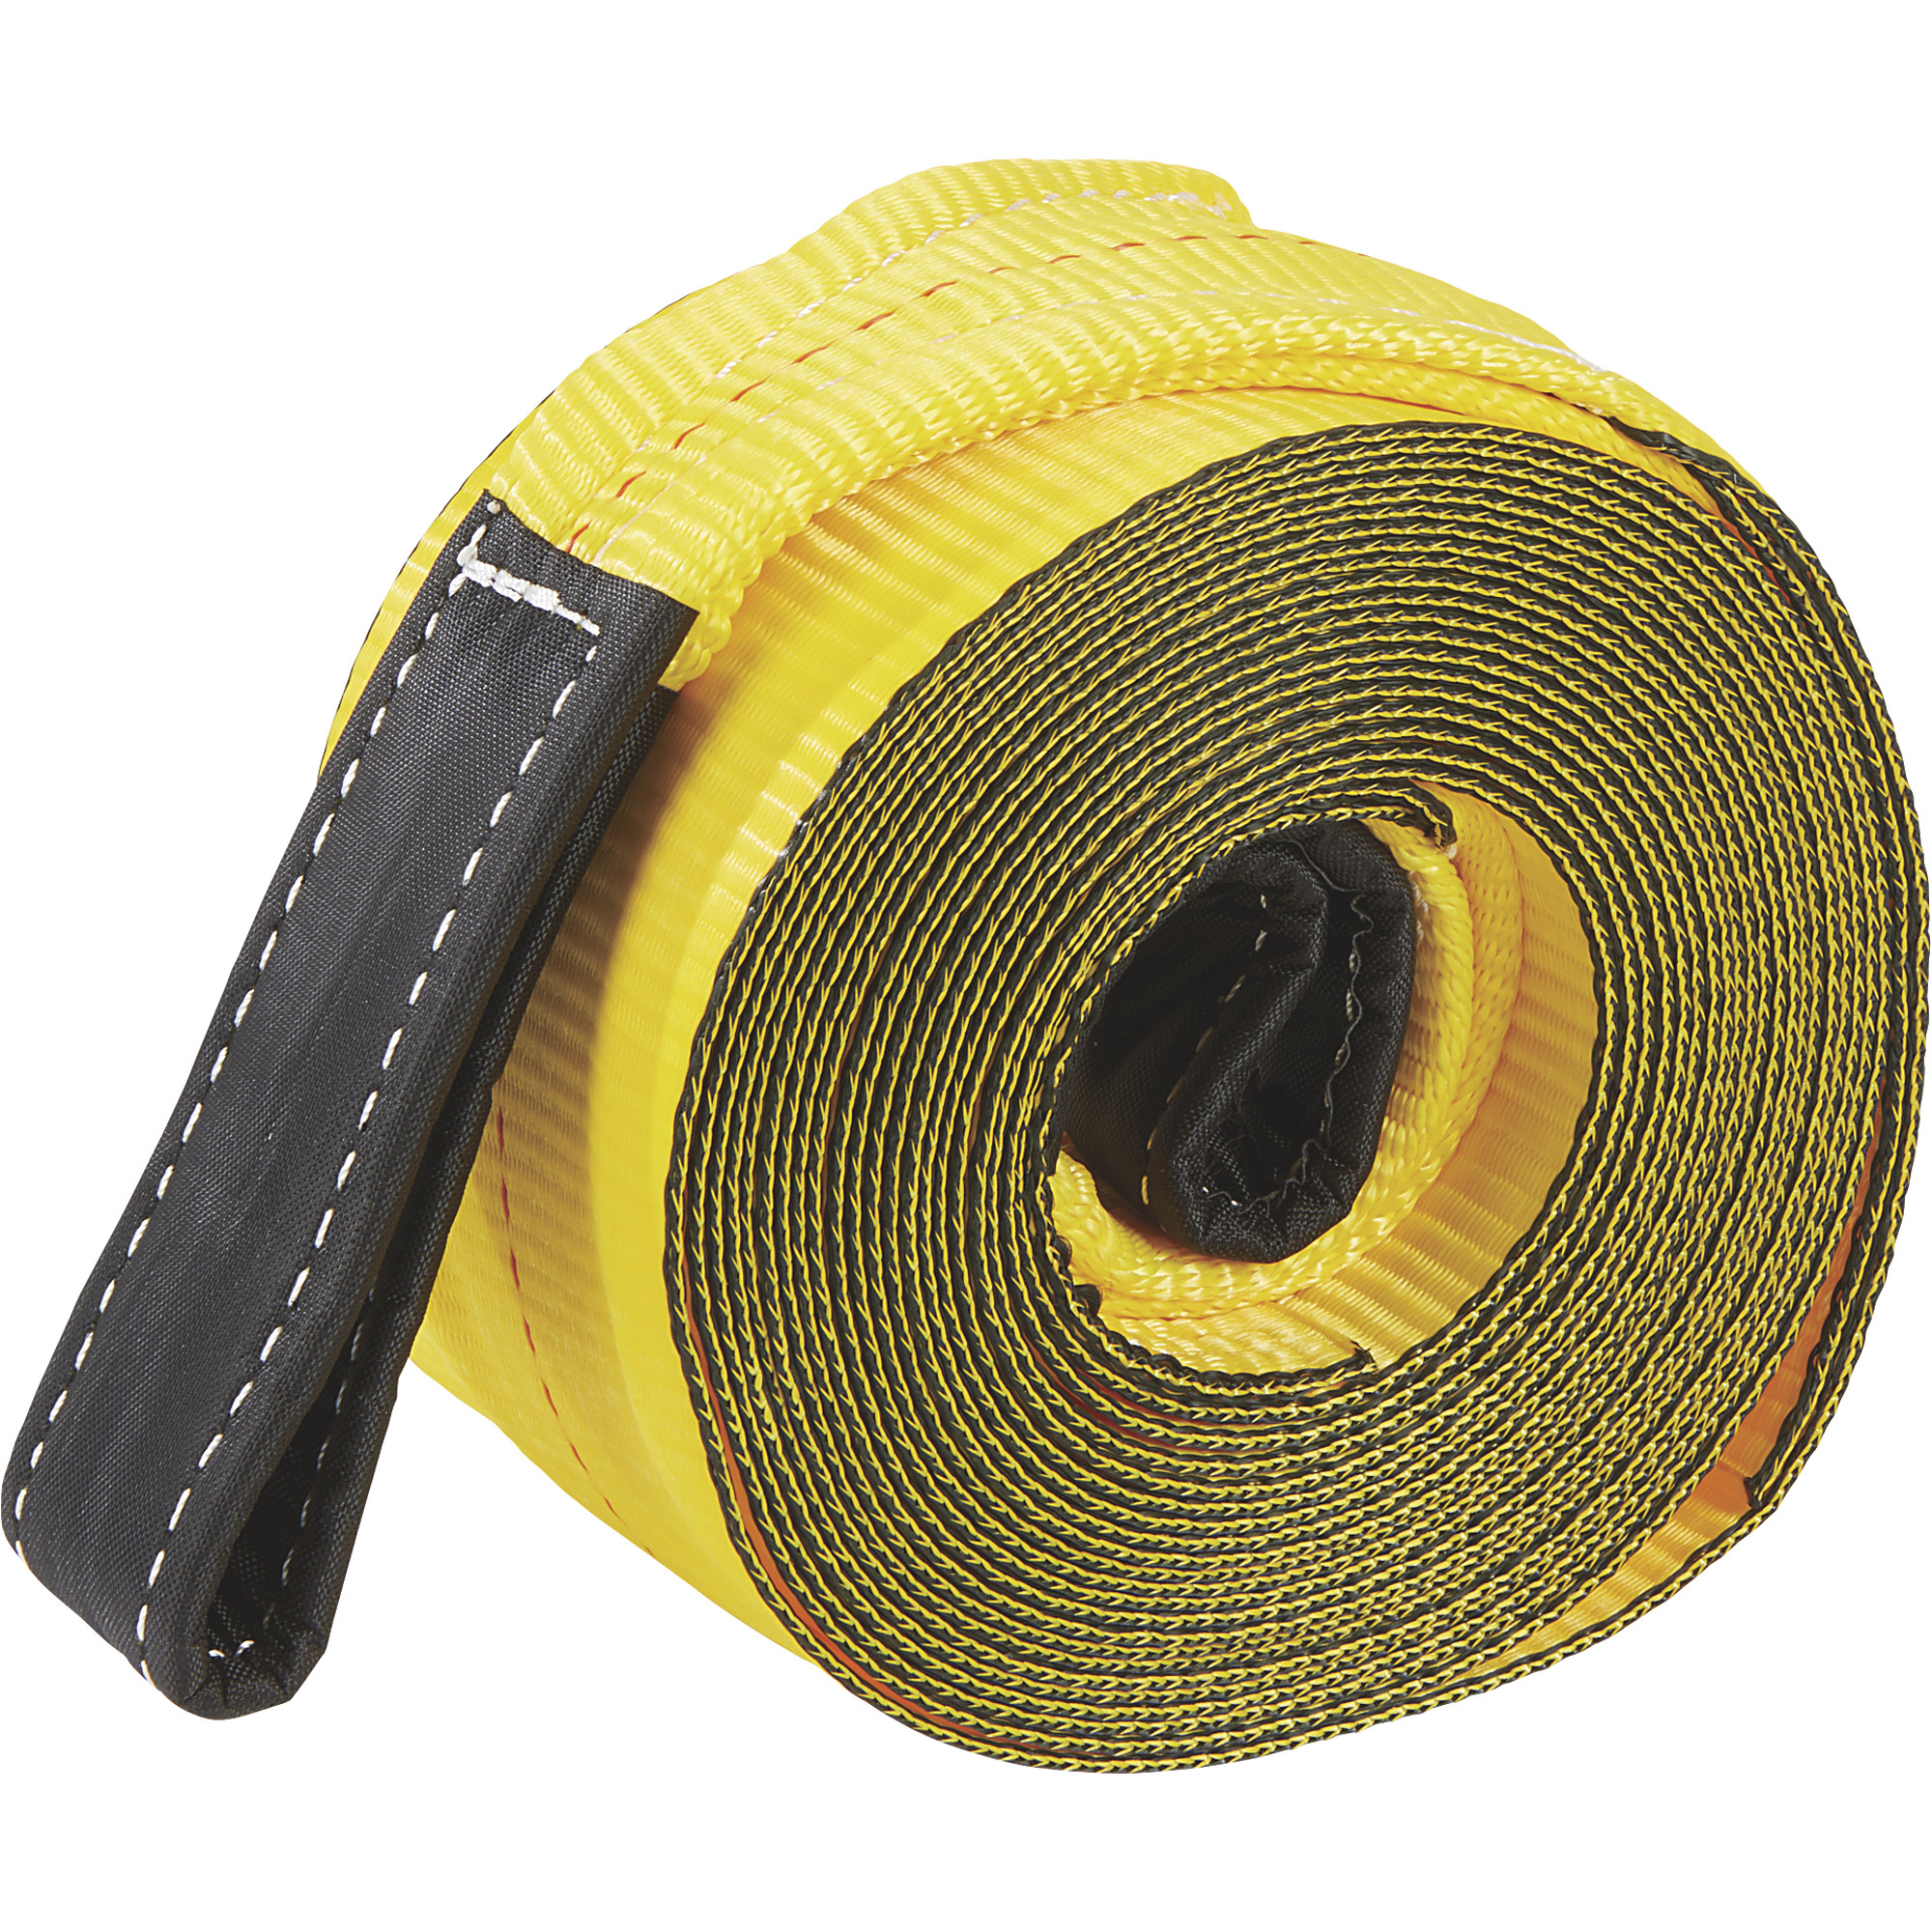 Ultra-Tow 4Inch x 30ft. Tow Strap, 20,000-Lb. Breaking Strength, 6,666-Lb. Working Load, Yellow, Model A819301